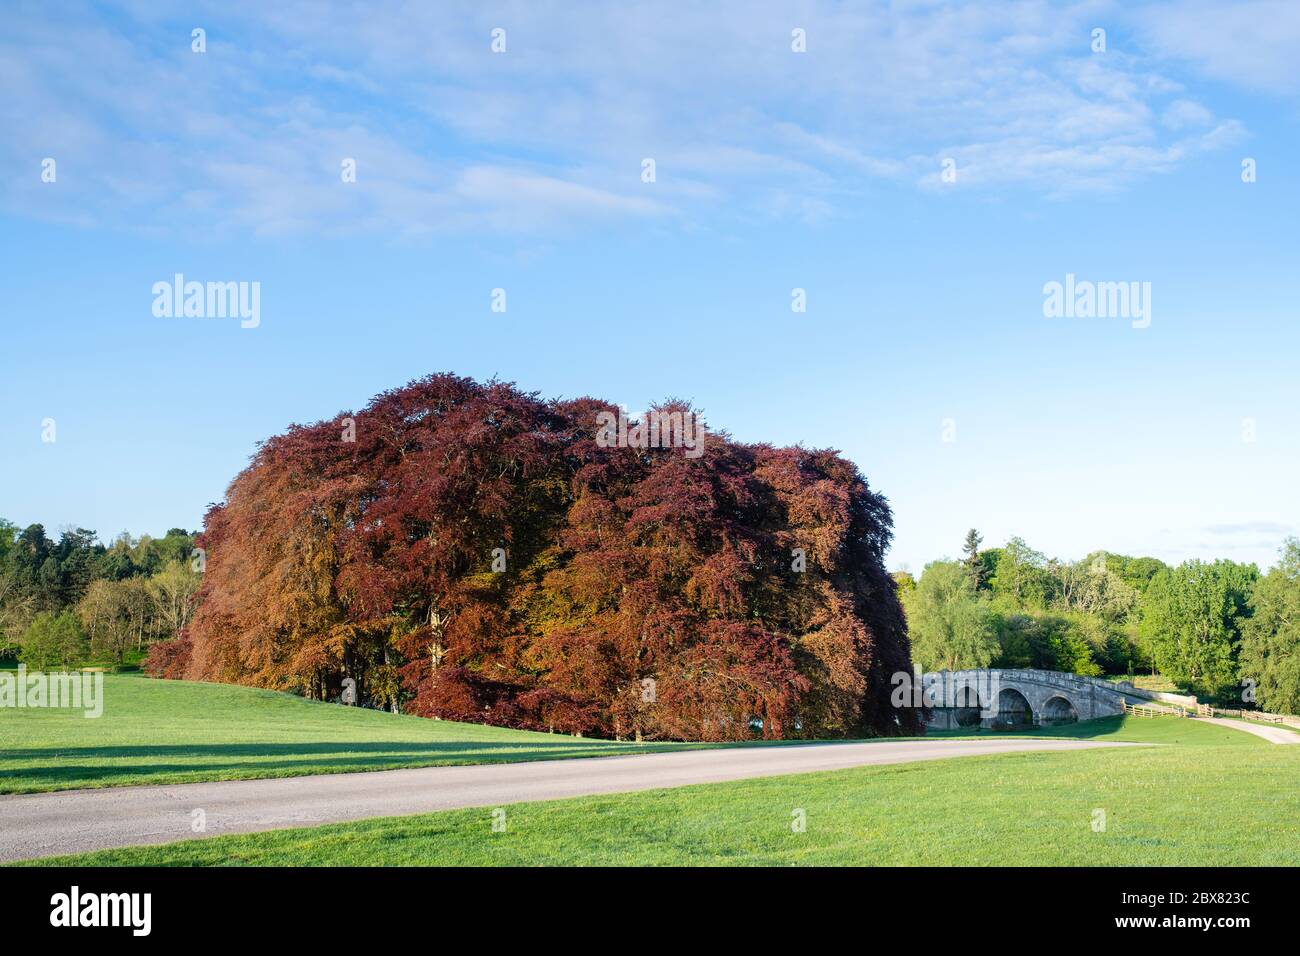 Copper beech trees and bridge in the early morning. Blenheim palace park, Woodstock, Oxfordshire, England Stock Photo